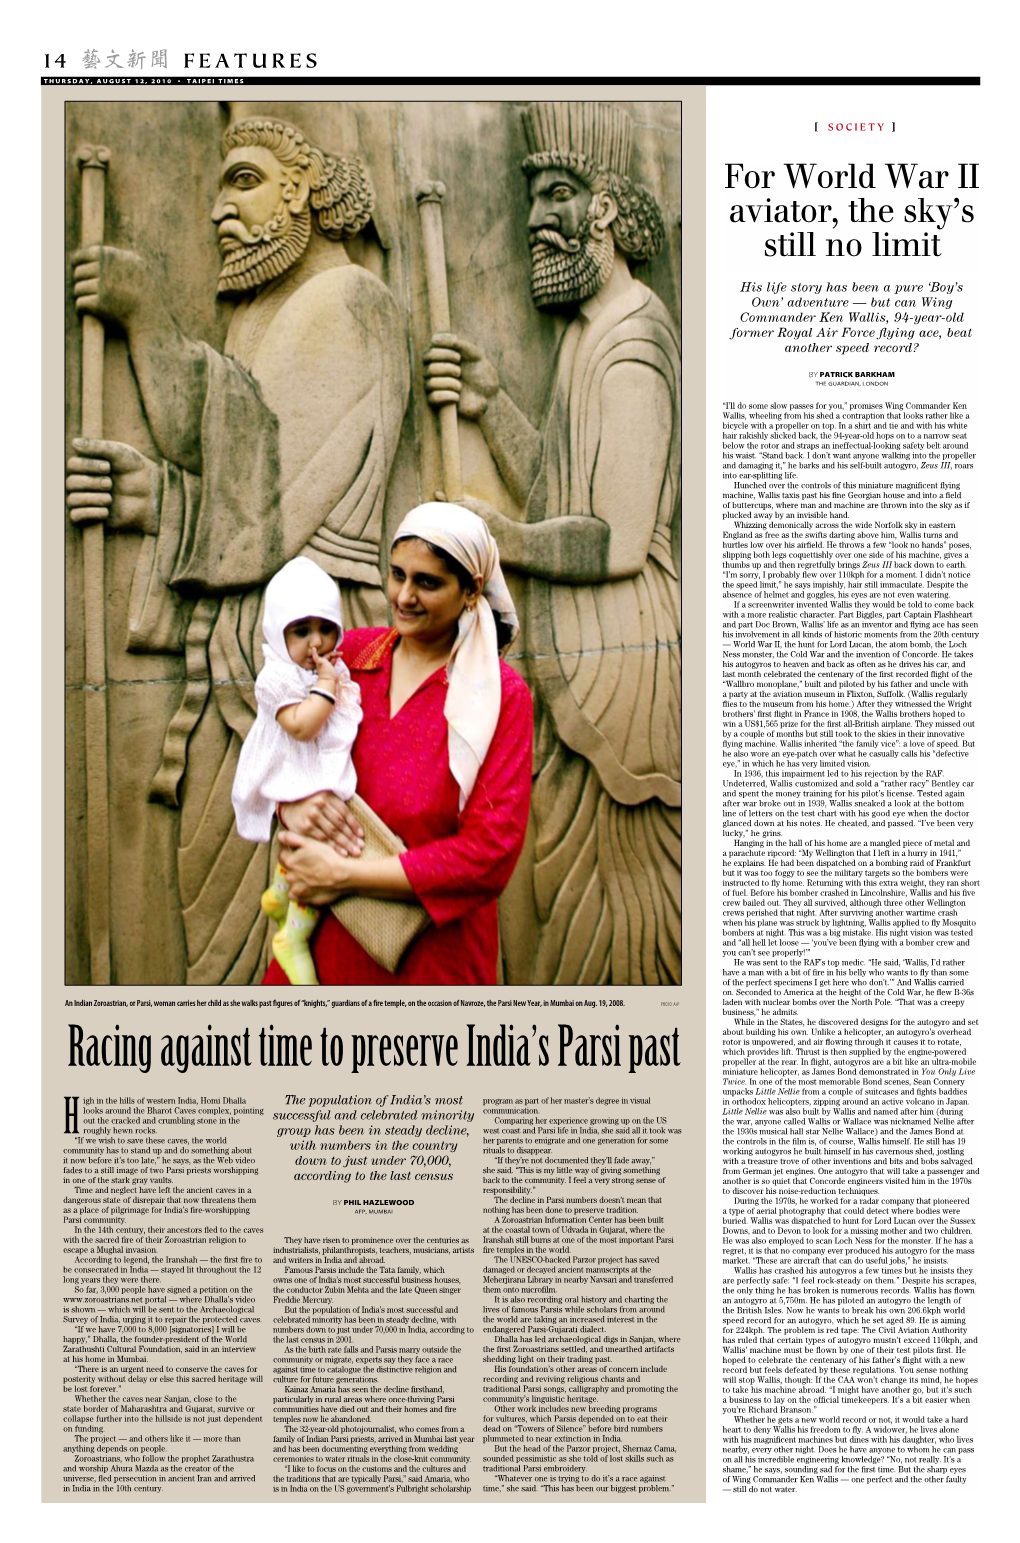 Racing Against Time to Preserve India's Parsi Past